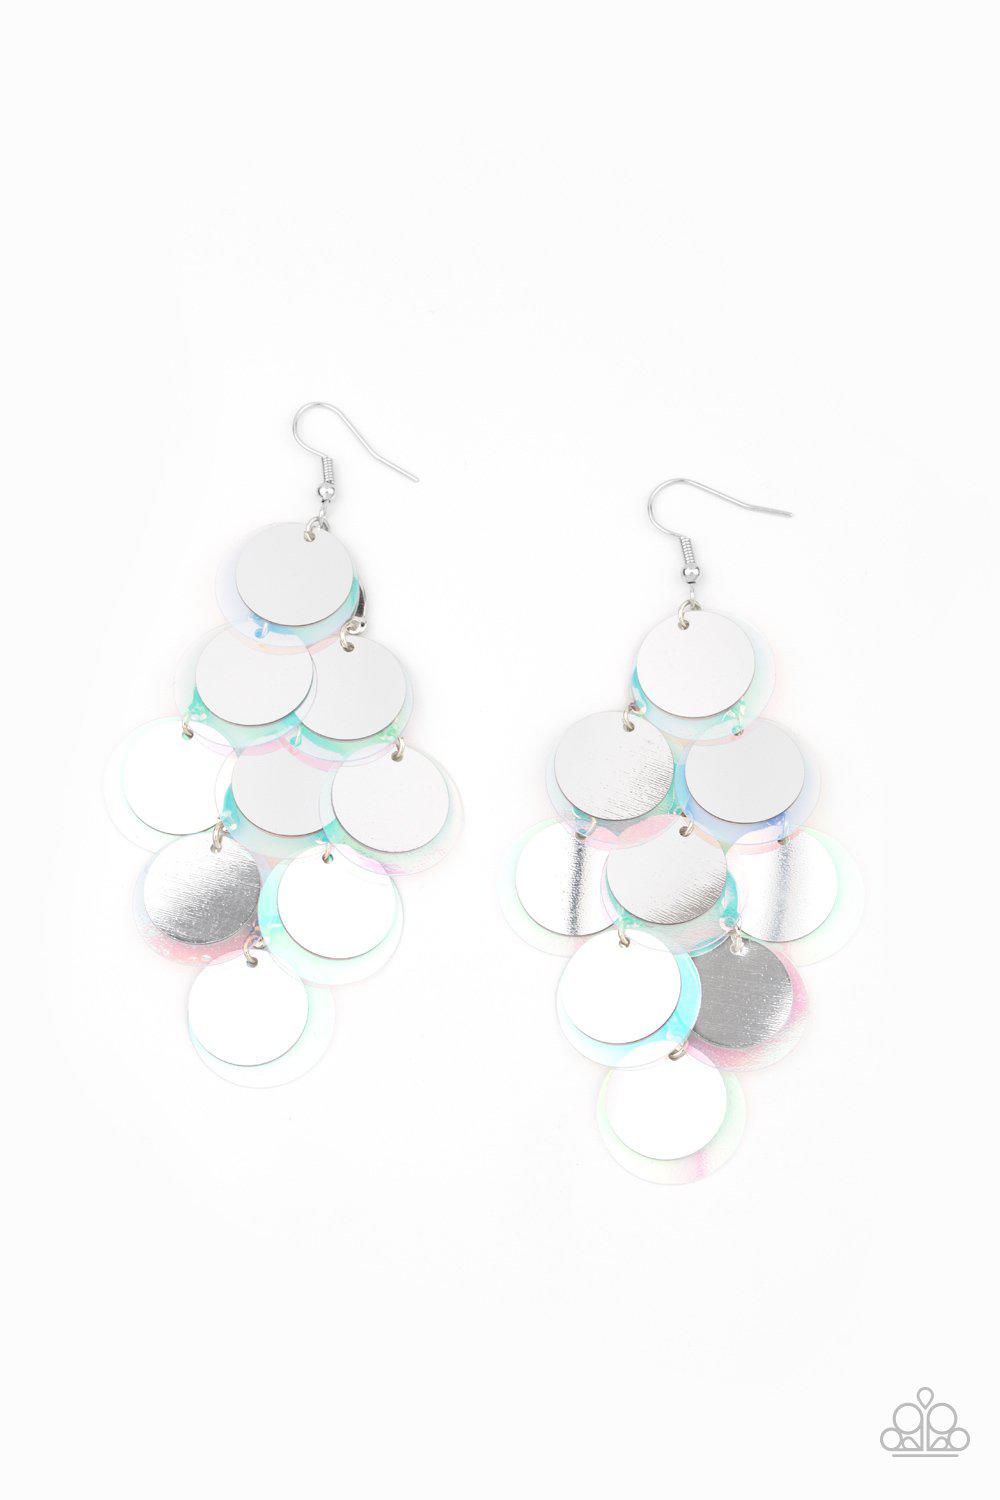 Sequin Seeker Silver and Iridescent Sequin Cascading Earrings - Paparazzi Accessories- lightbox - CarasShop.com - $5 Jewelry by Cara Jewels